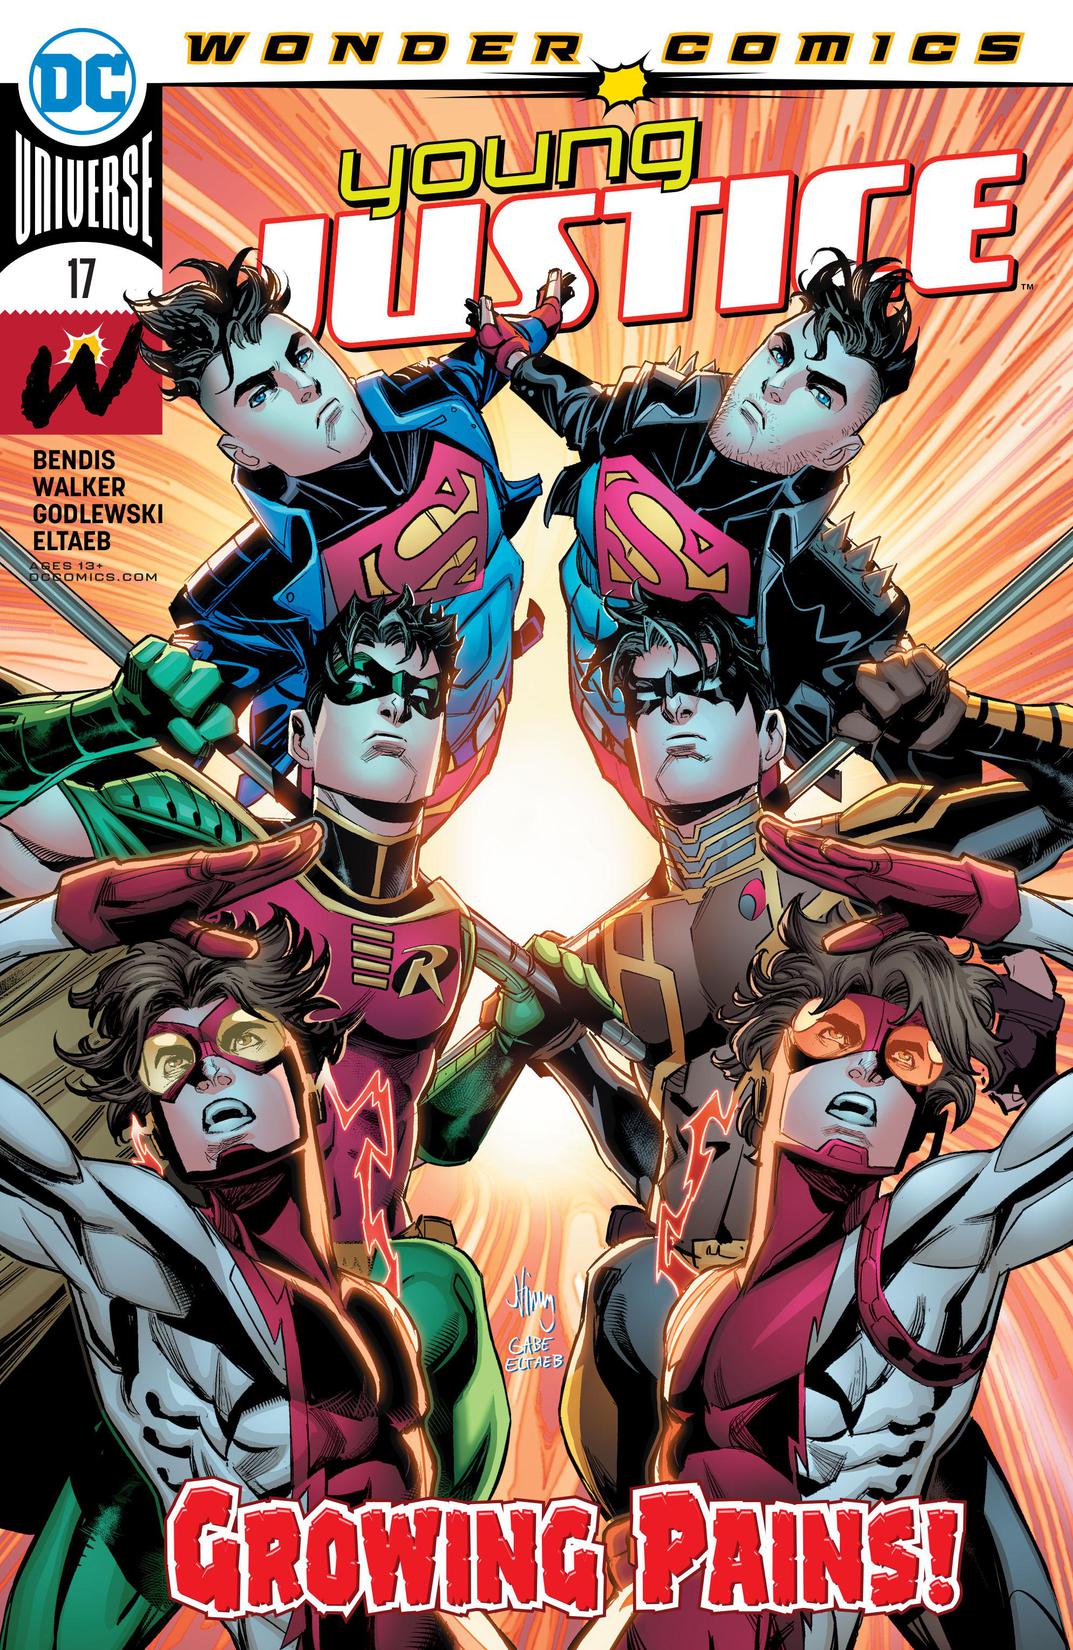 Young Justice (2019-) #17 preview images